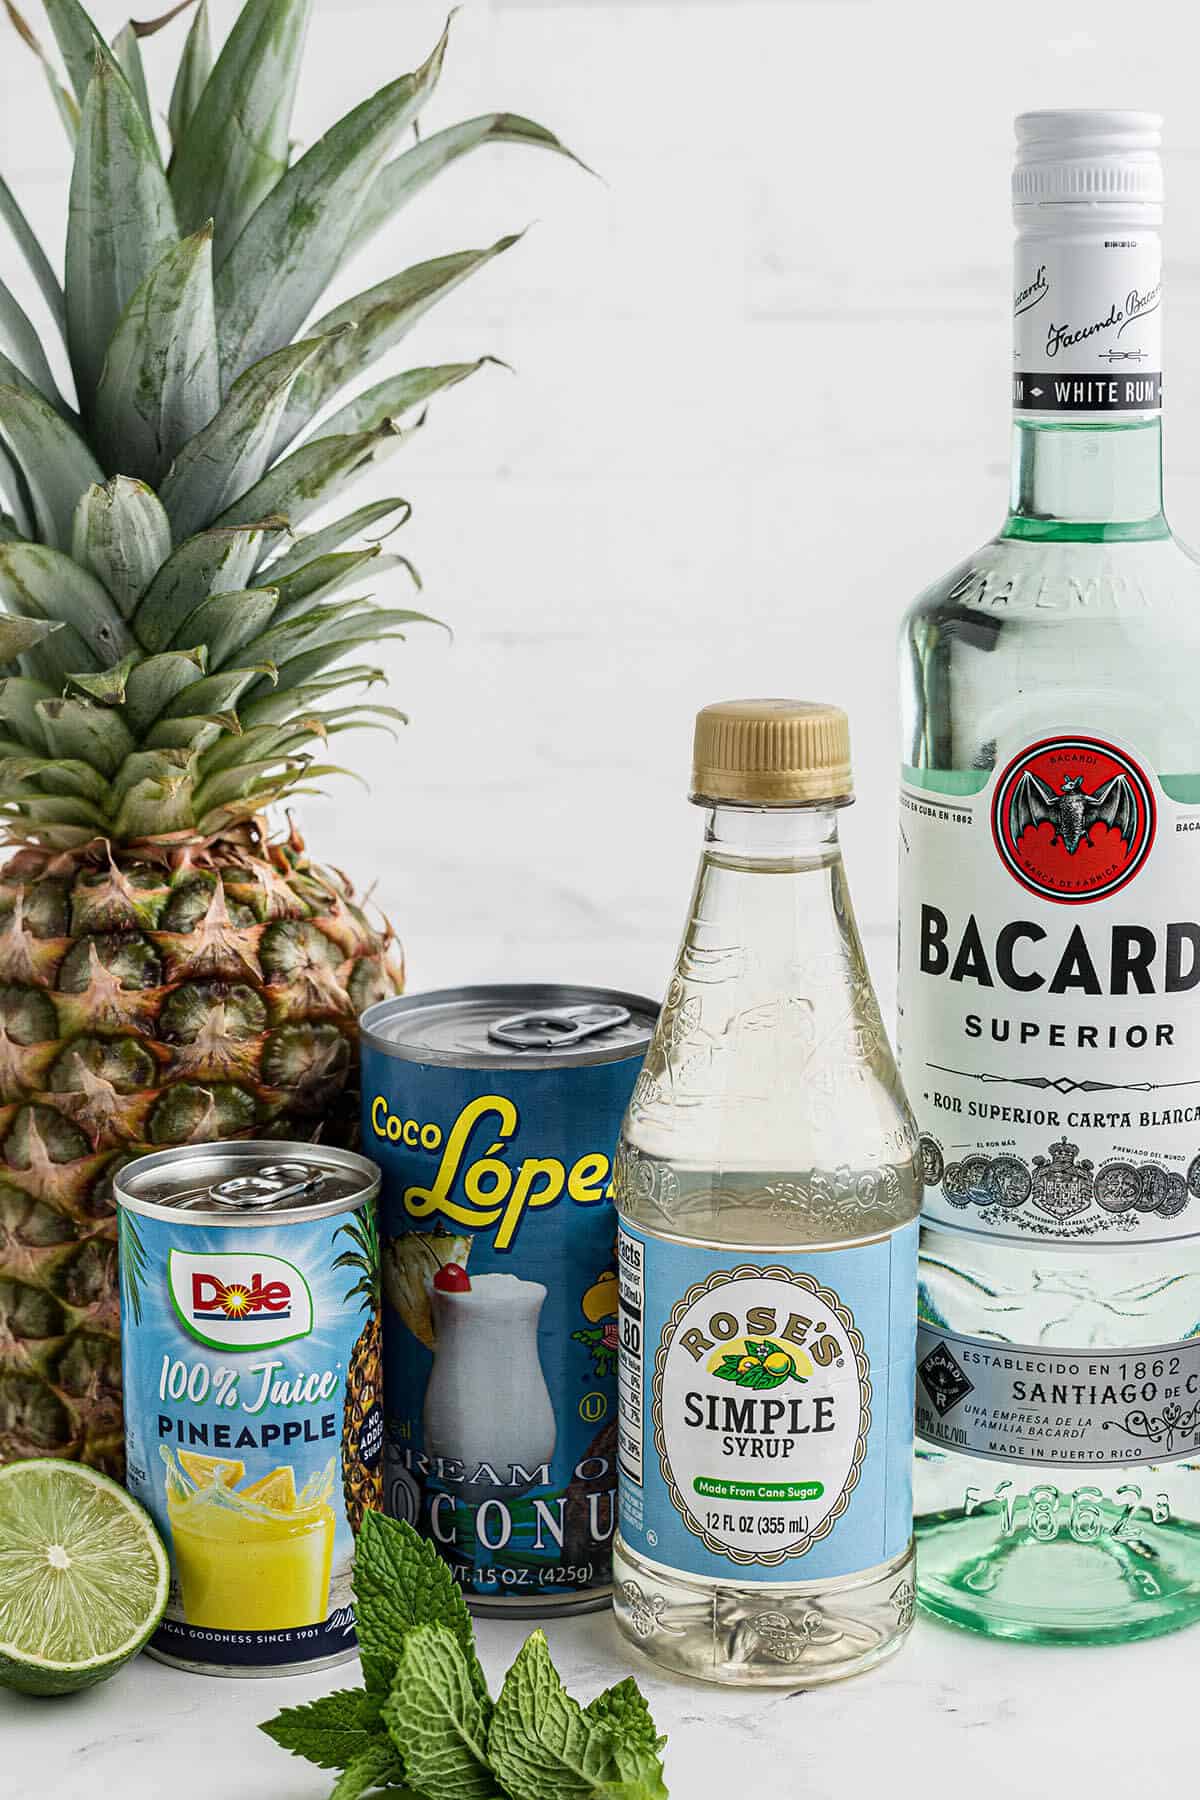 Ingredients to make the cocktail; pineapple juice, cream of coconut, simple syrup, lime and light rum.